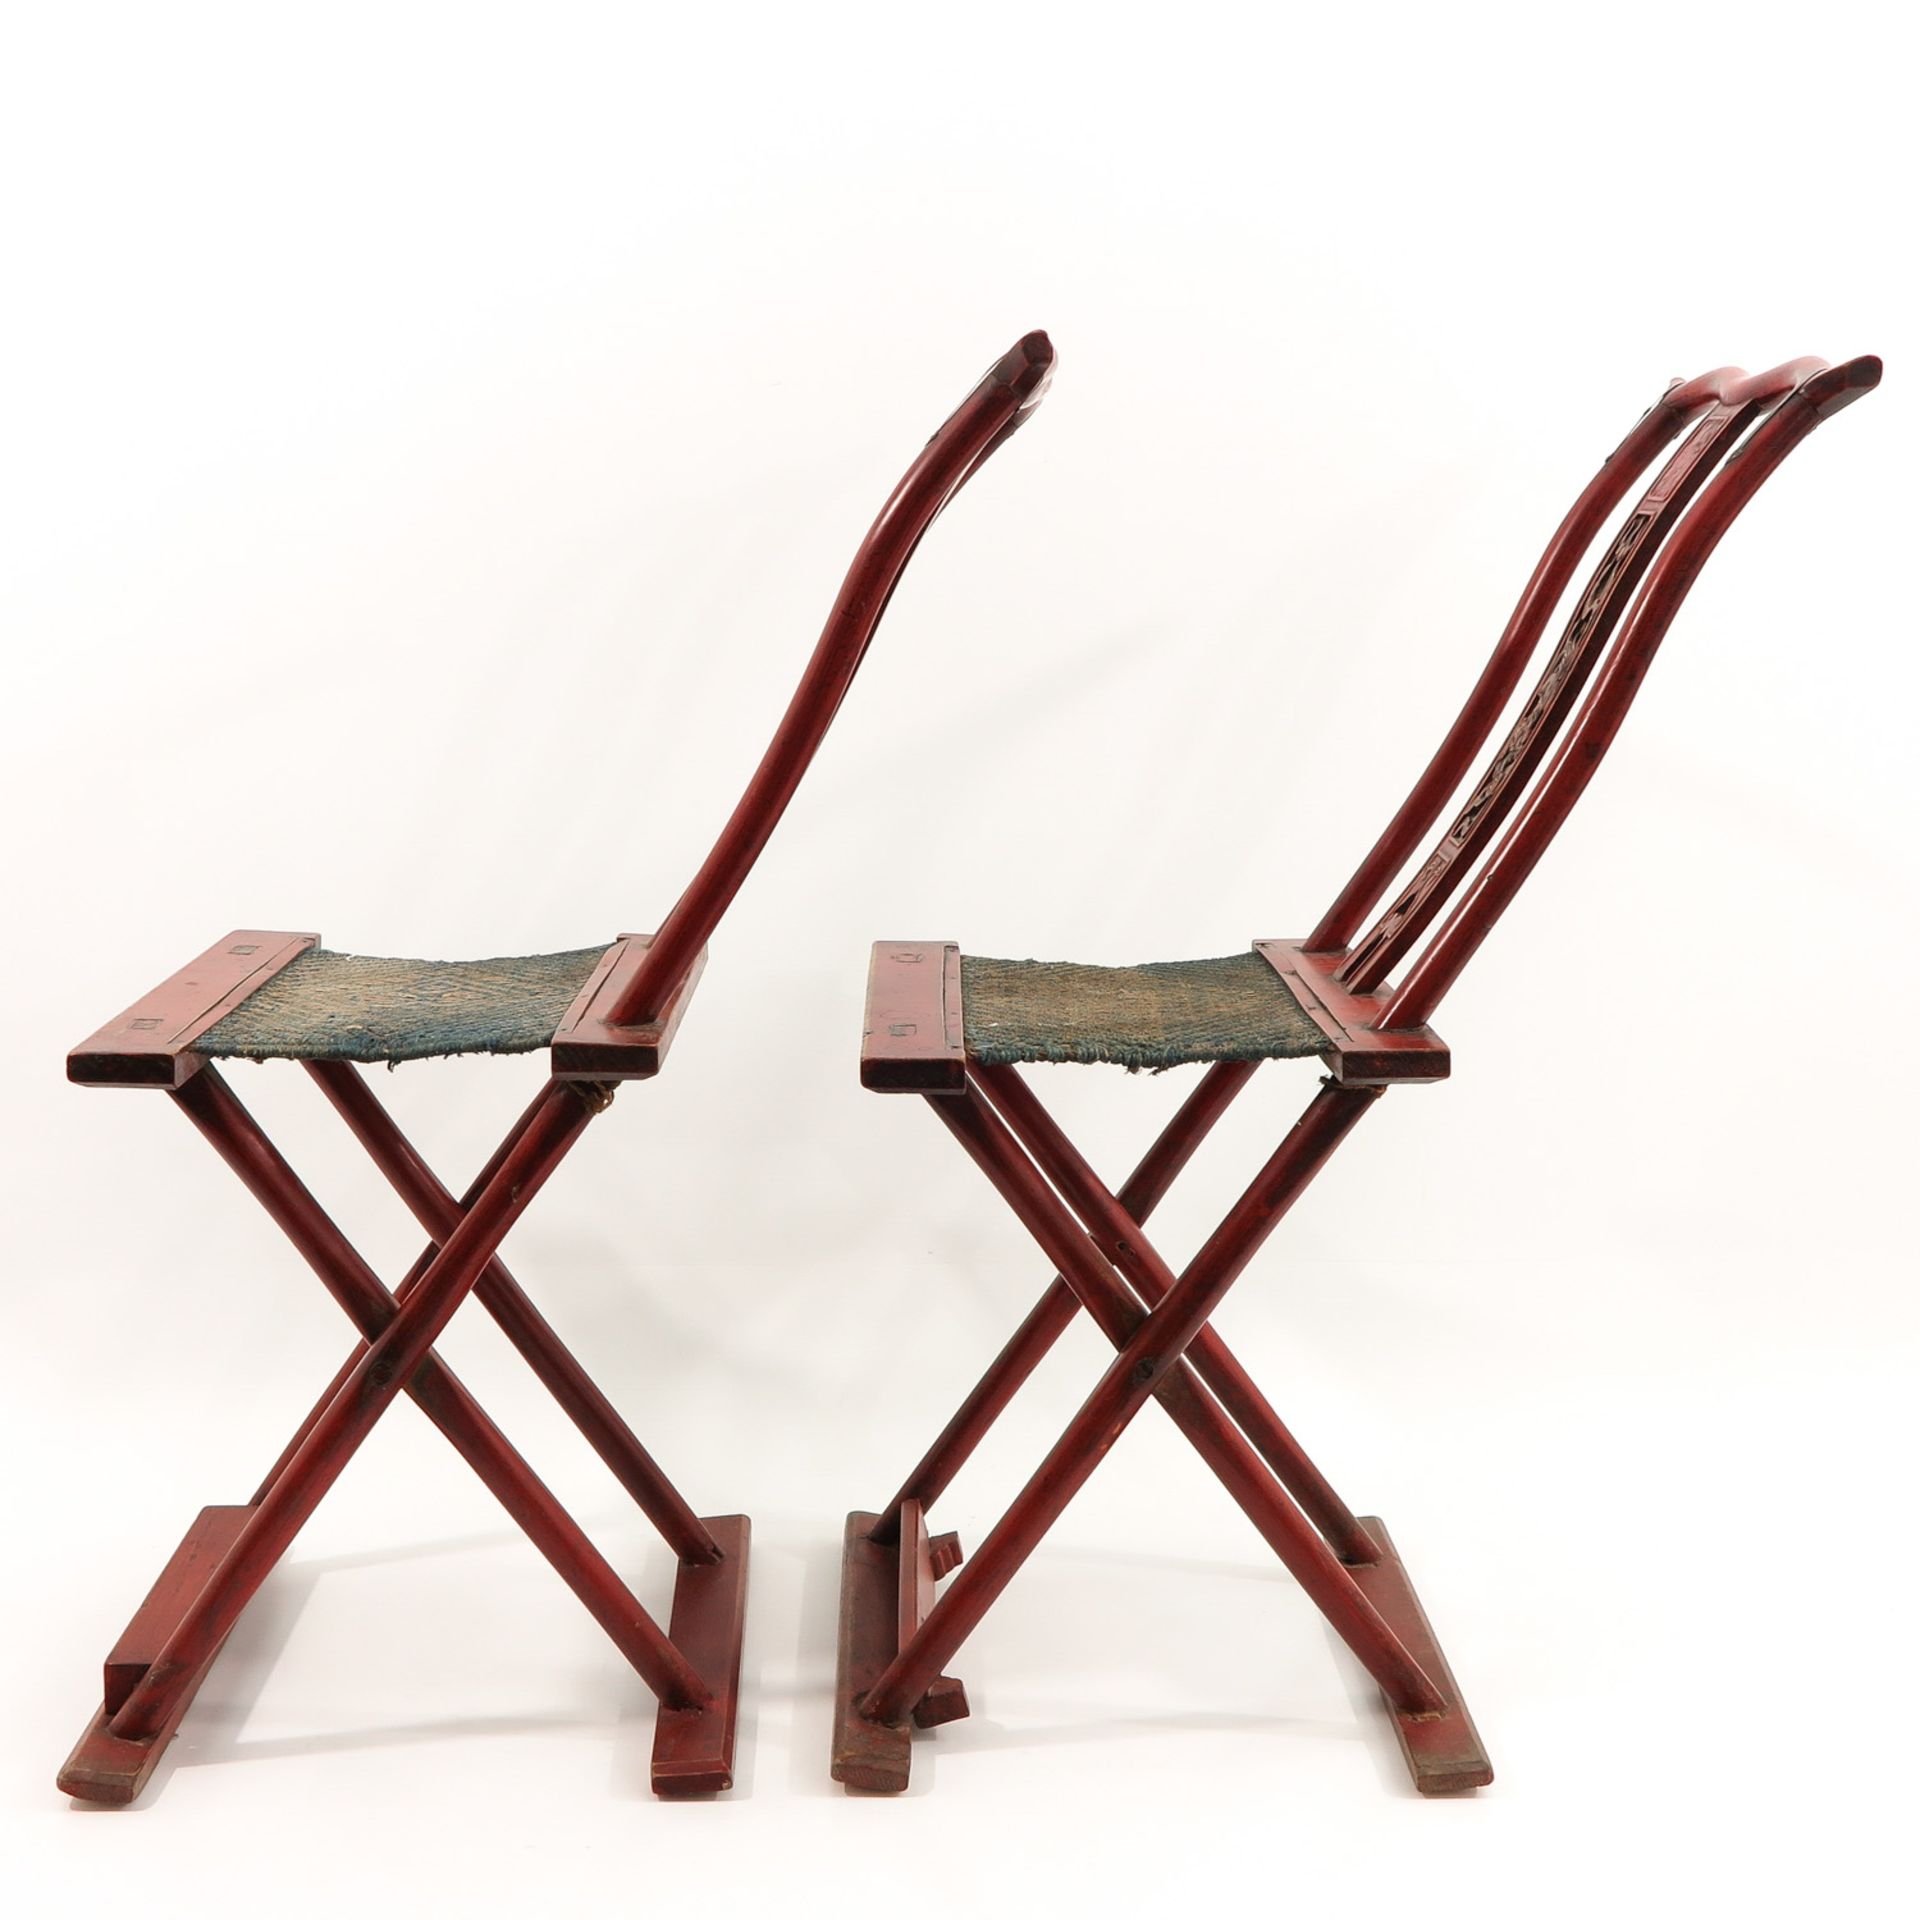 A Pair of Chinese Folding Chairs - Image 2 of 9